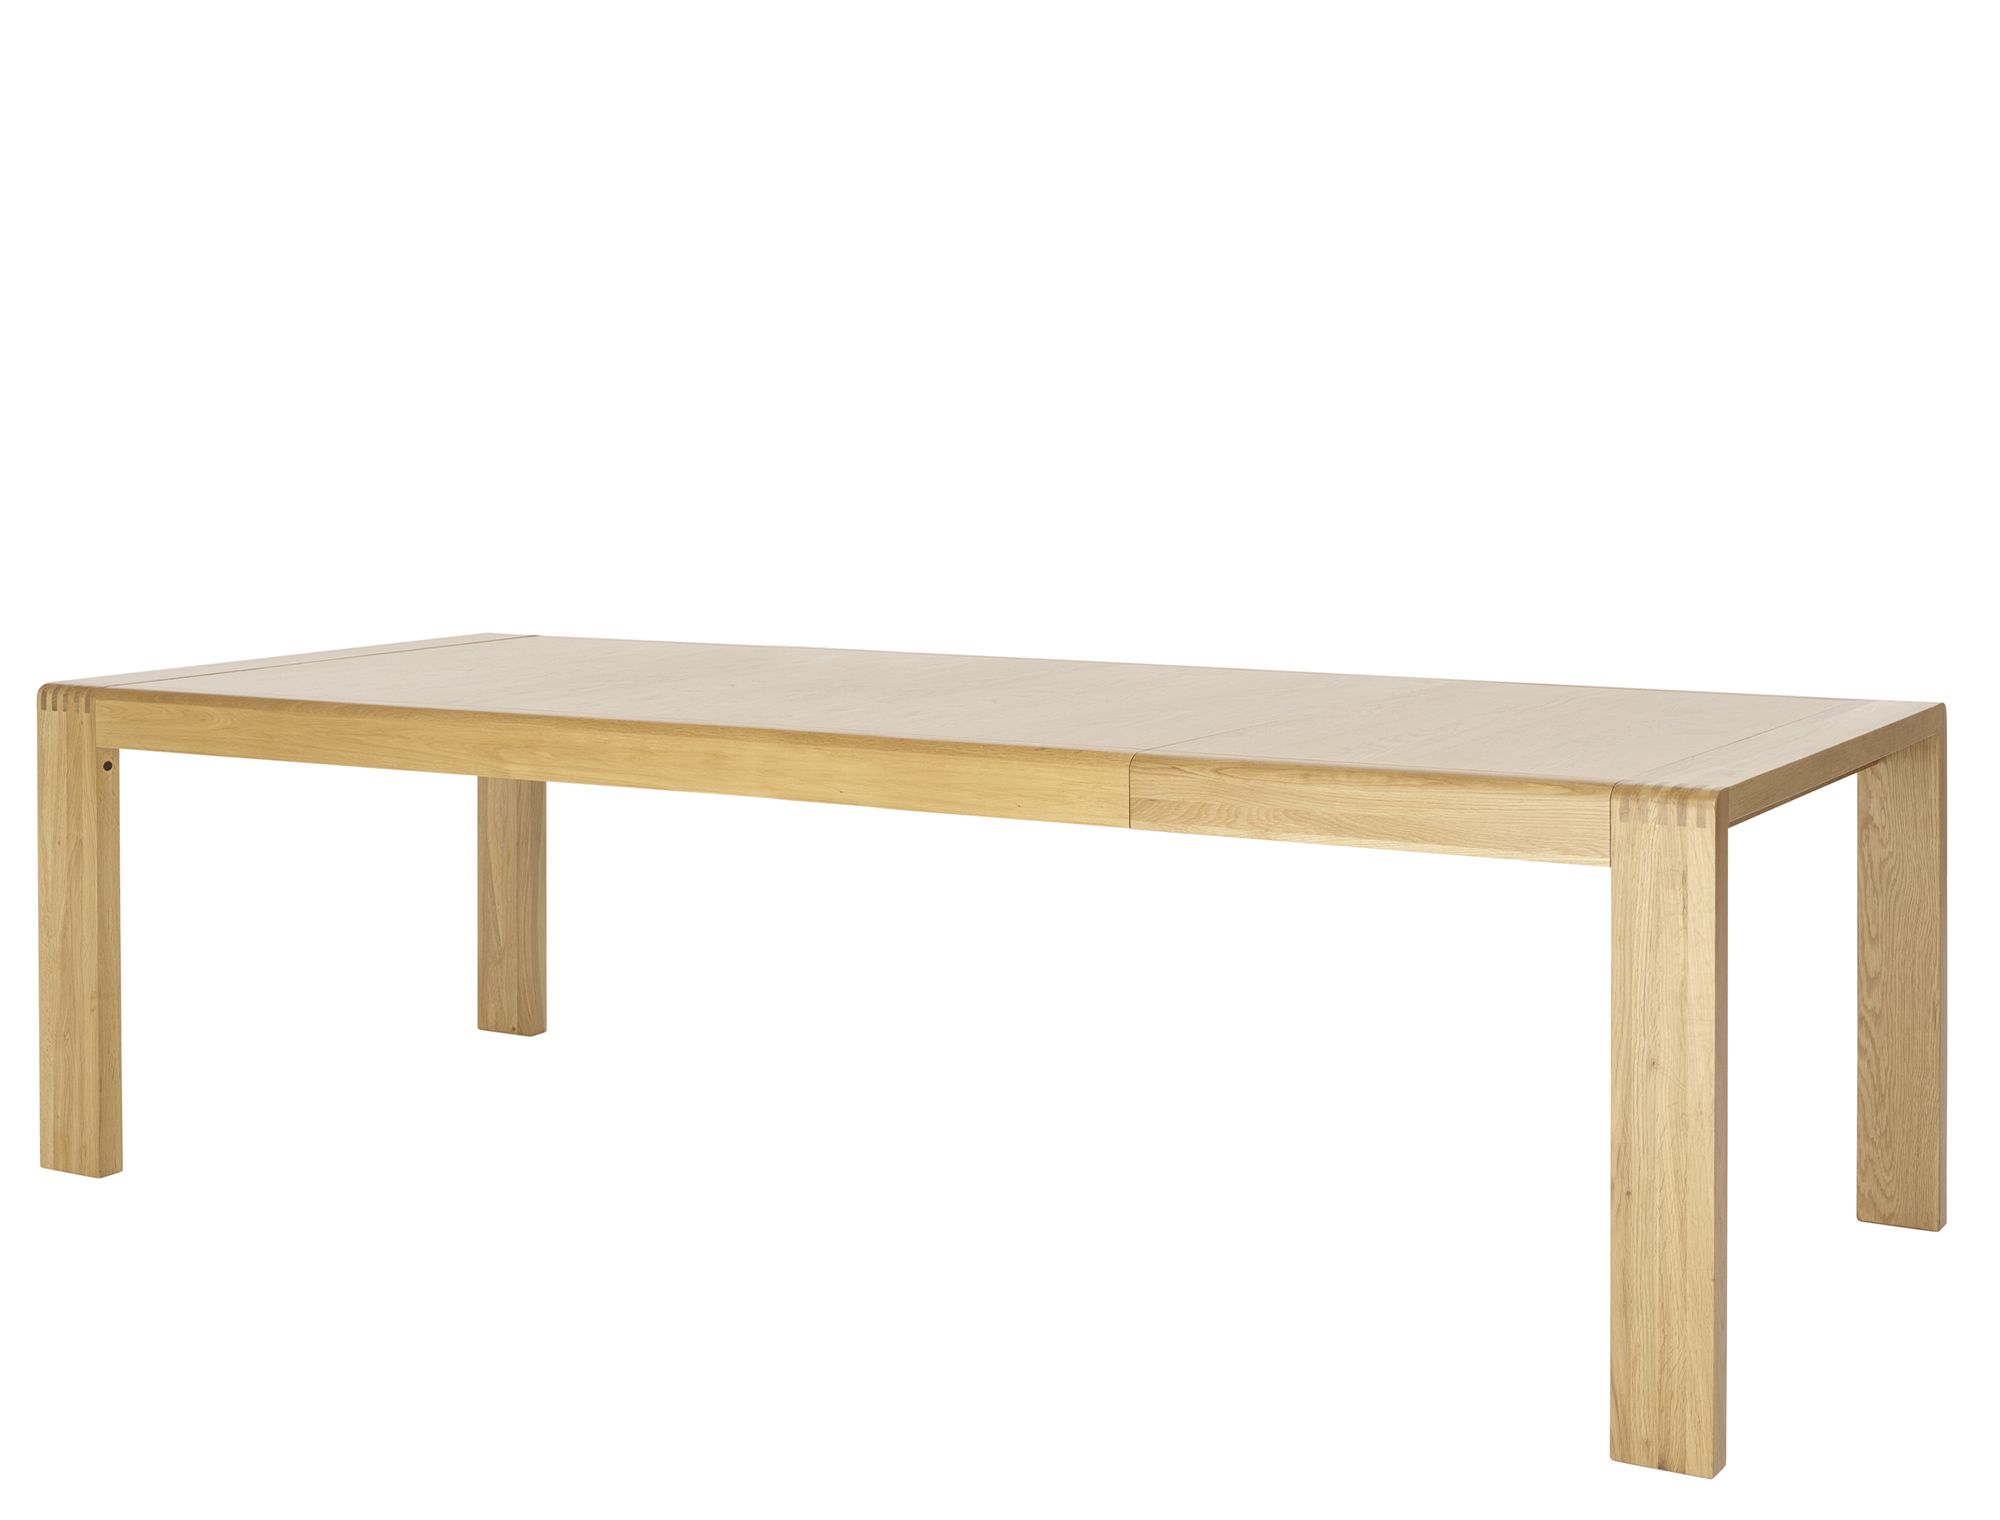 Bosco Medium Extending Dining Table – Ercol Furniture Intended For 2020 Medium Dining Tables (View 16 of 25)